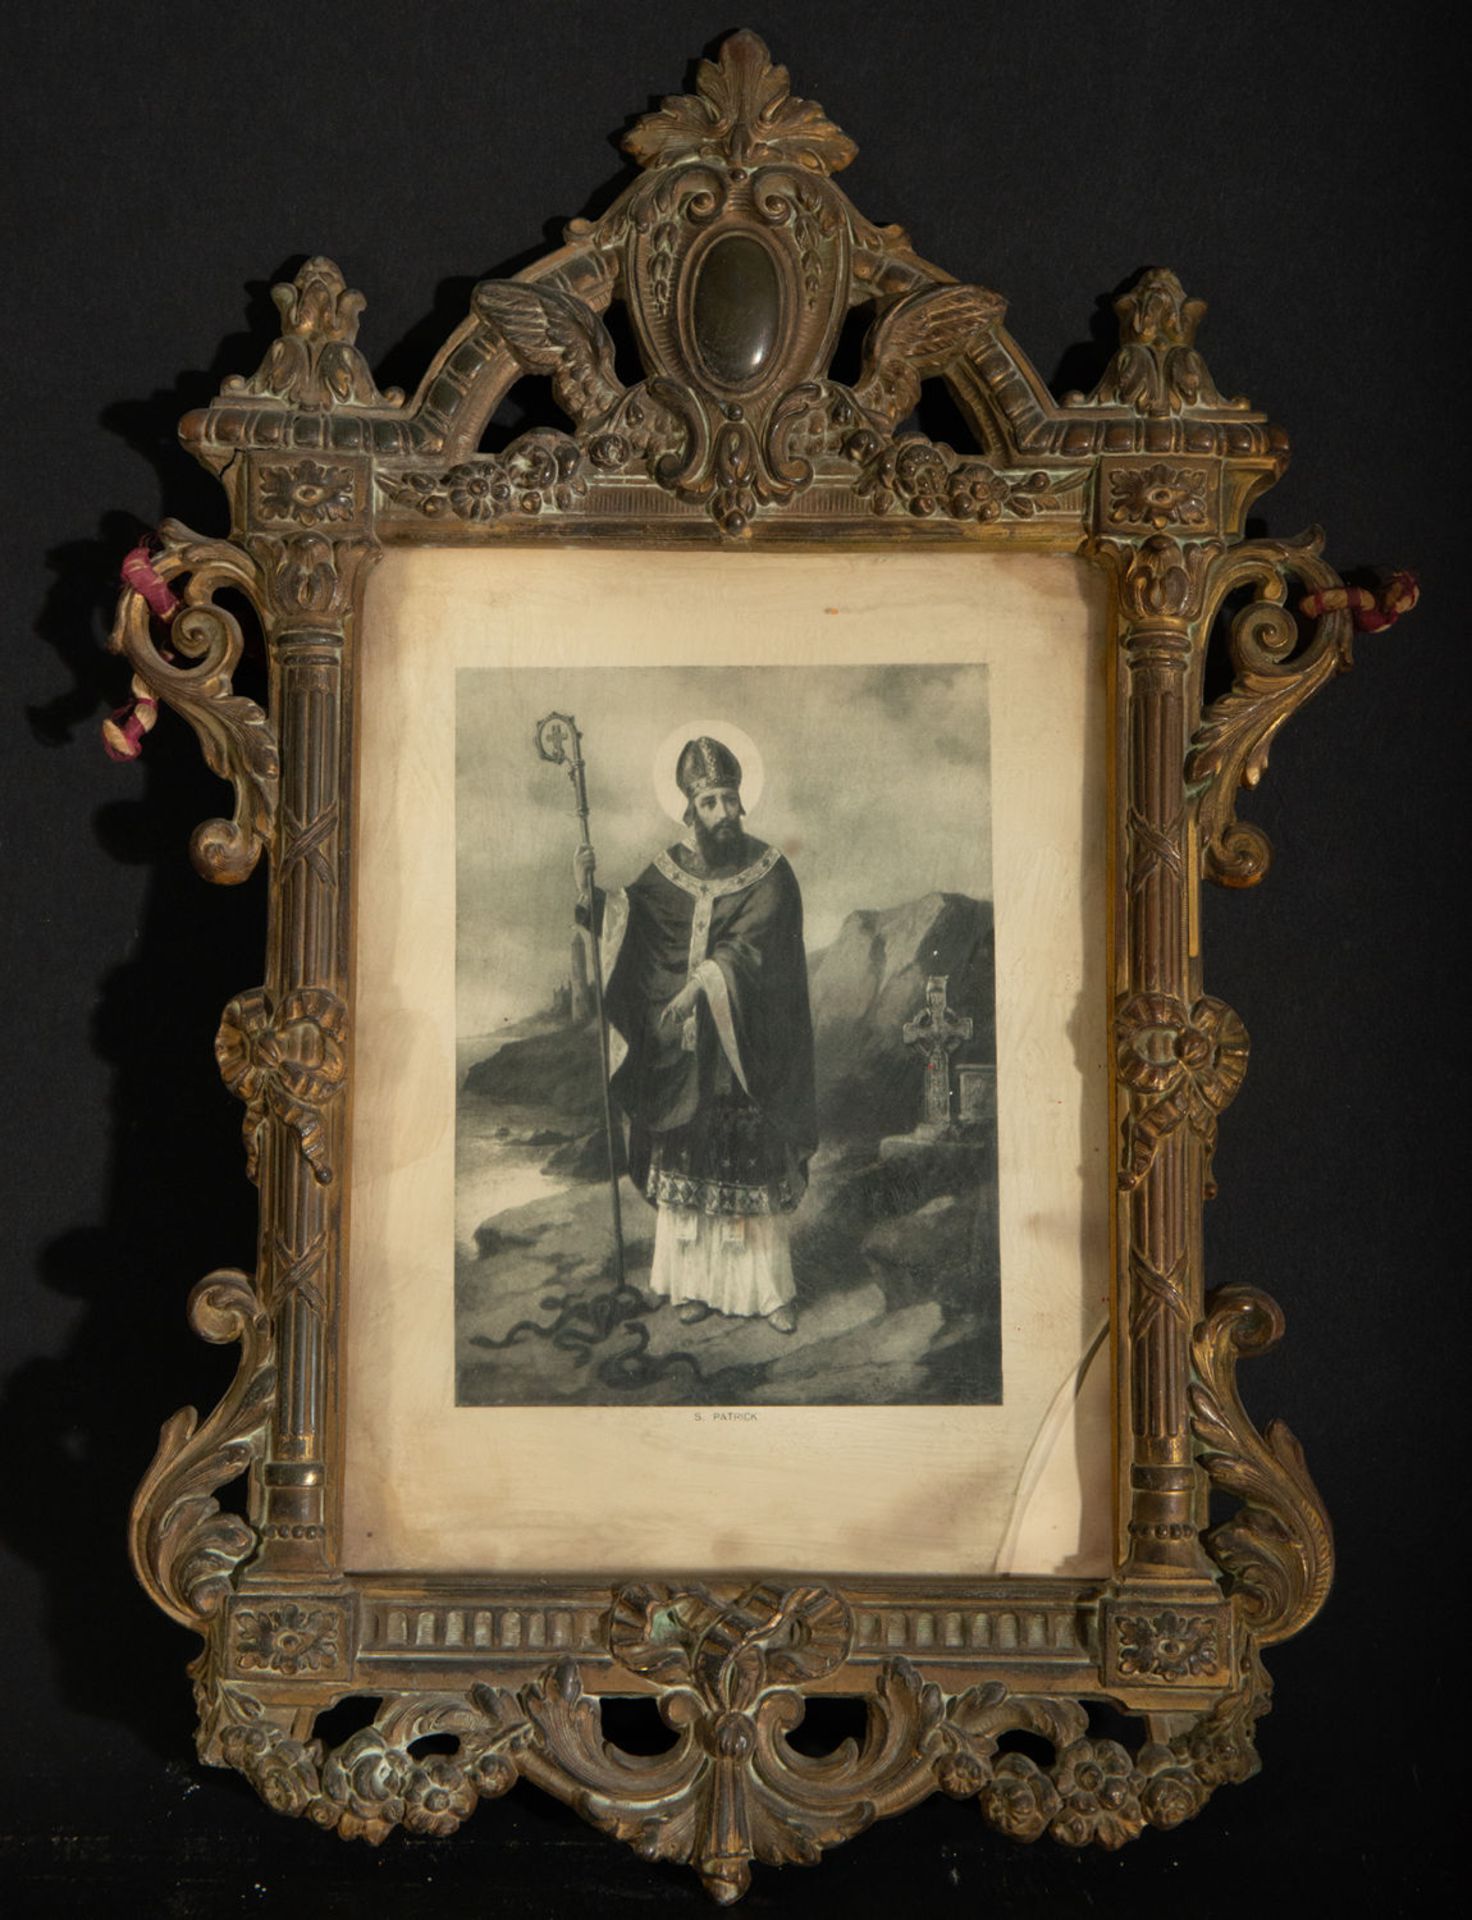 Italian bronze frame with engraving, 19th century